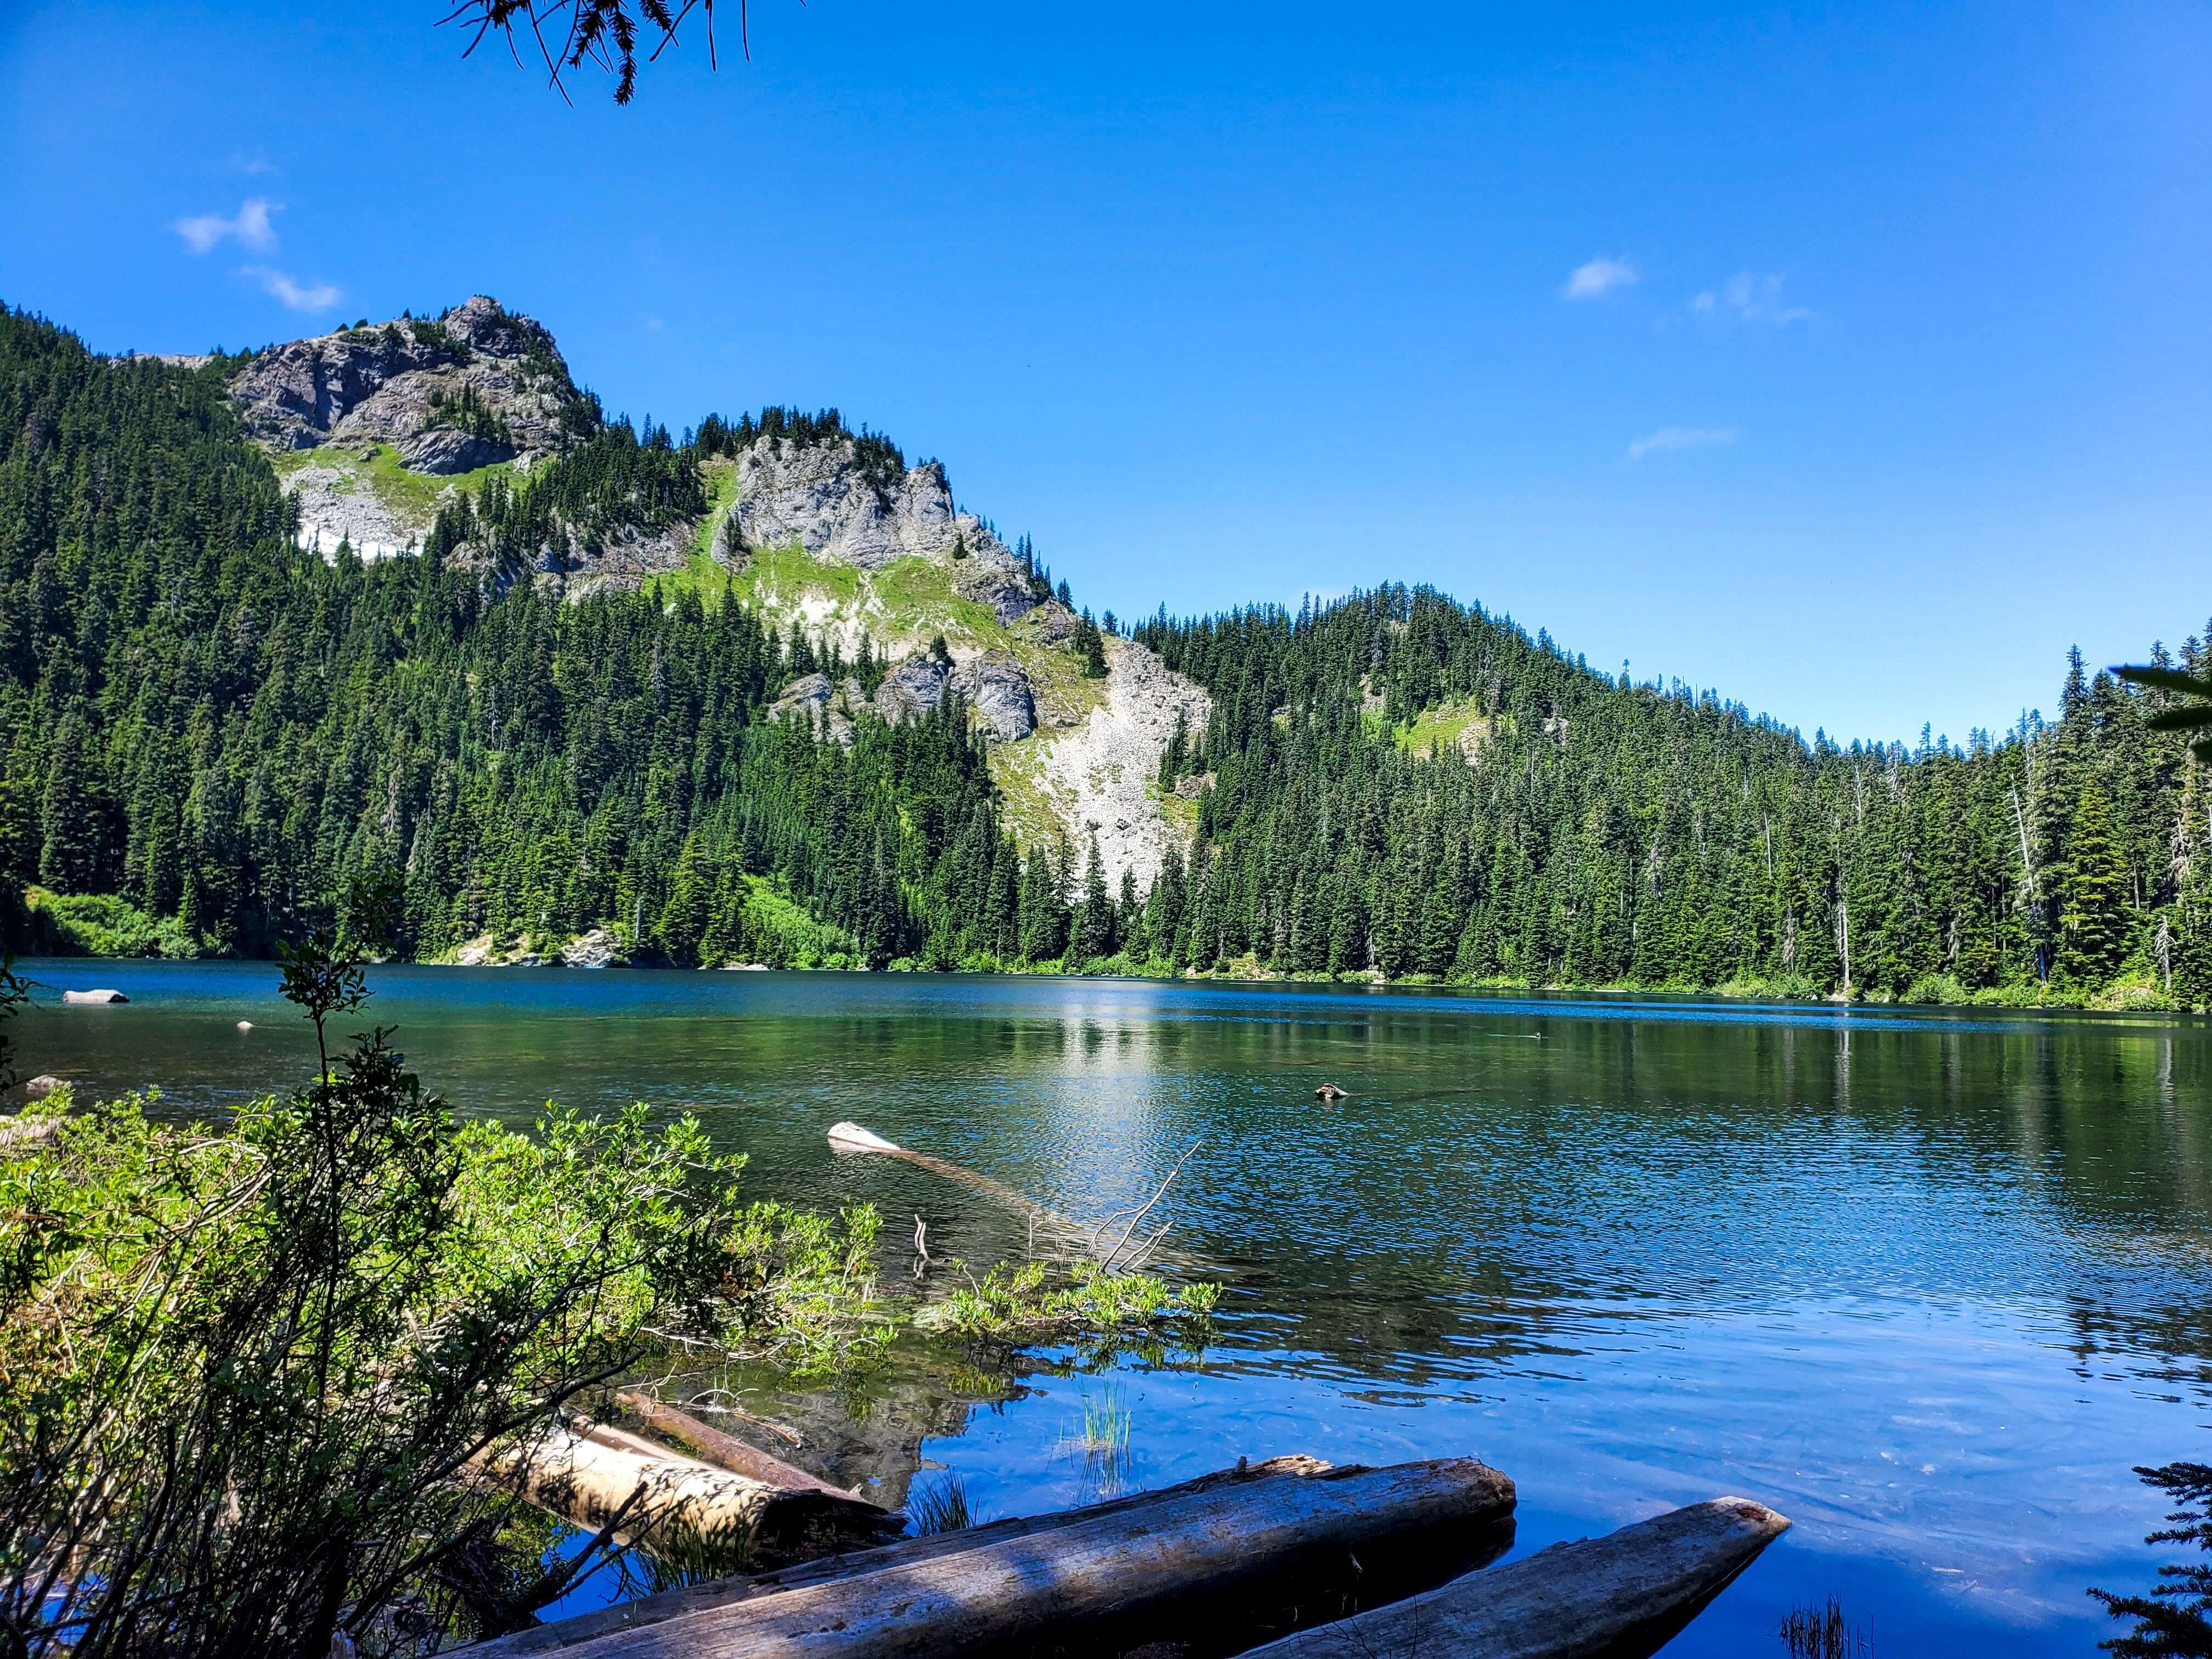 Mirror Lake in Washington surrounded by mountains and a blue sky